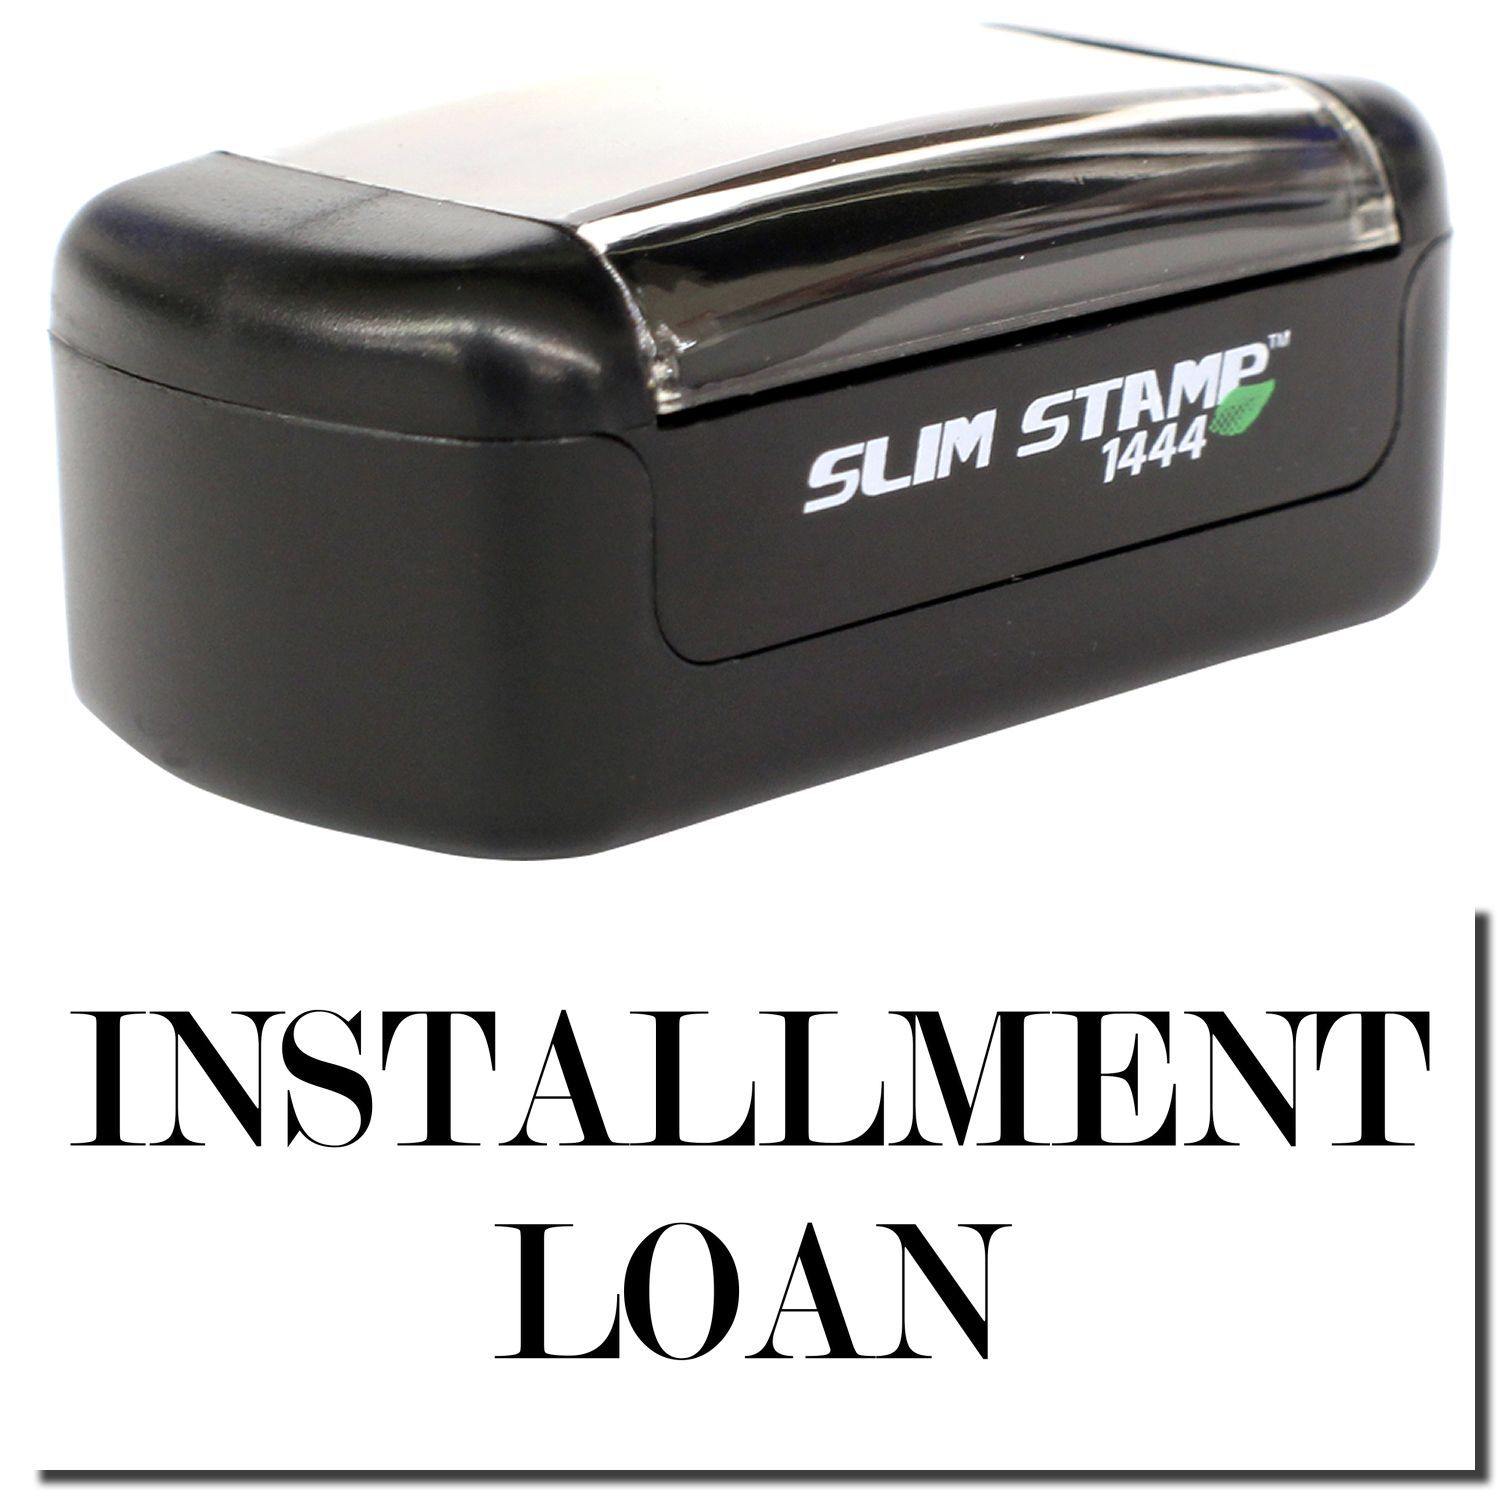 A stock office pre-inked stamp with a stamped image showing how the text "INSTALLMENT LOAN" is displayed after stamping.